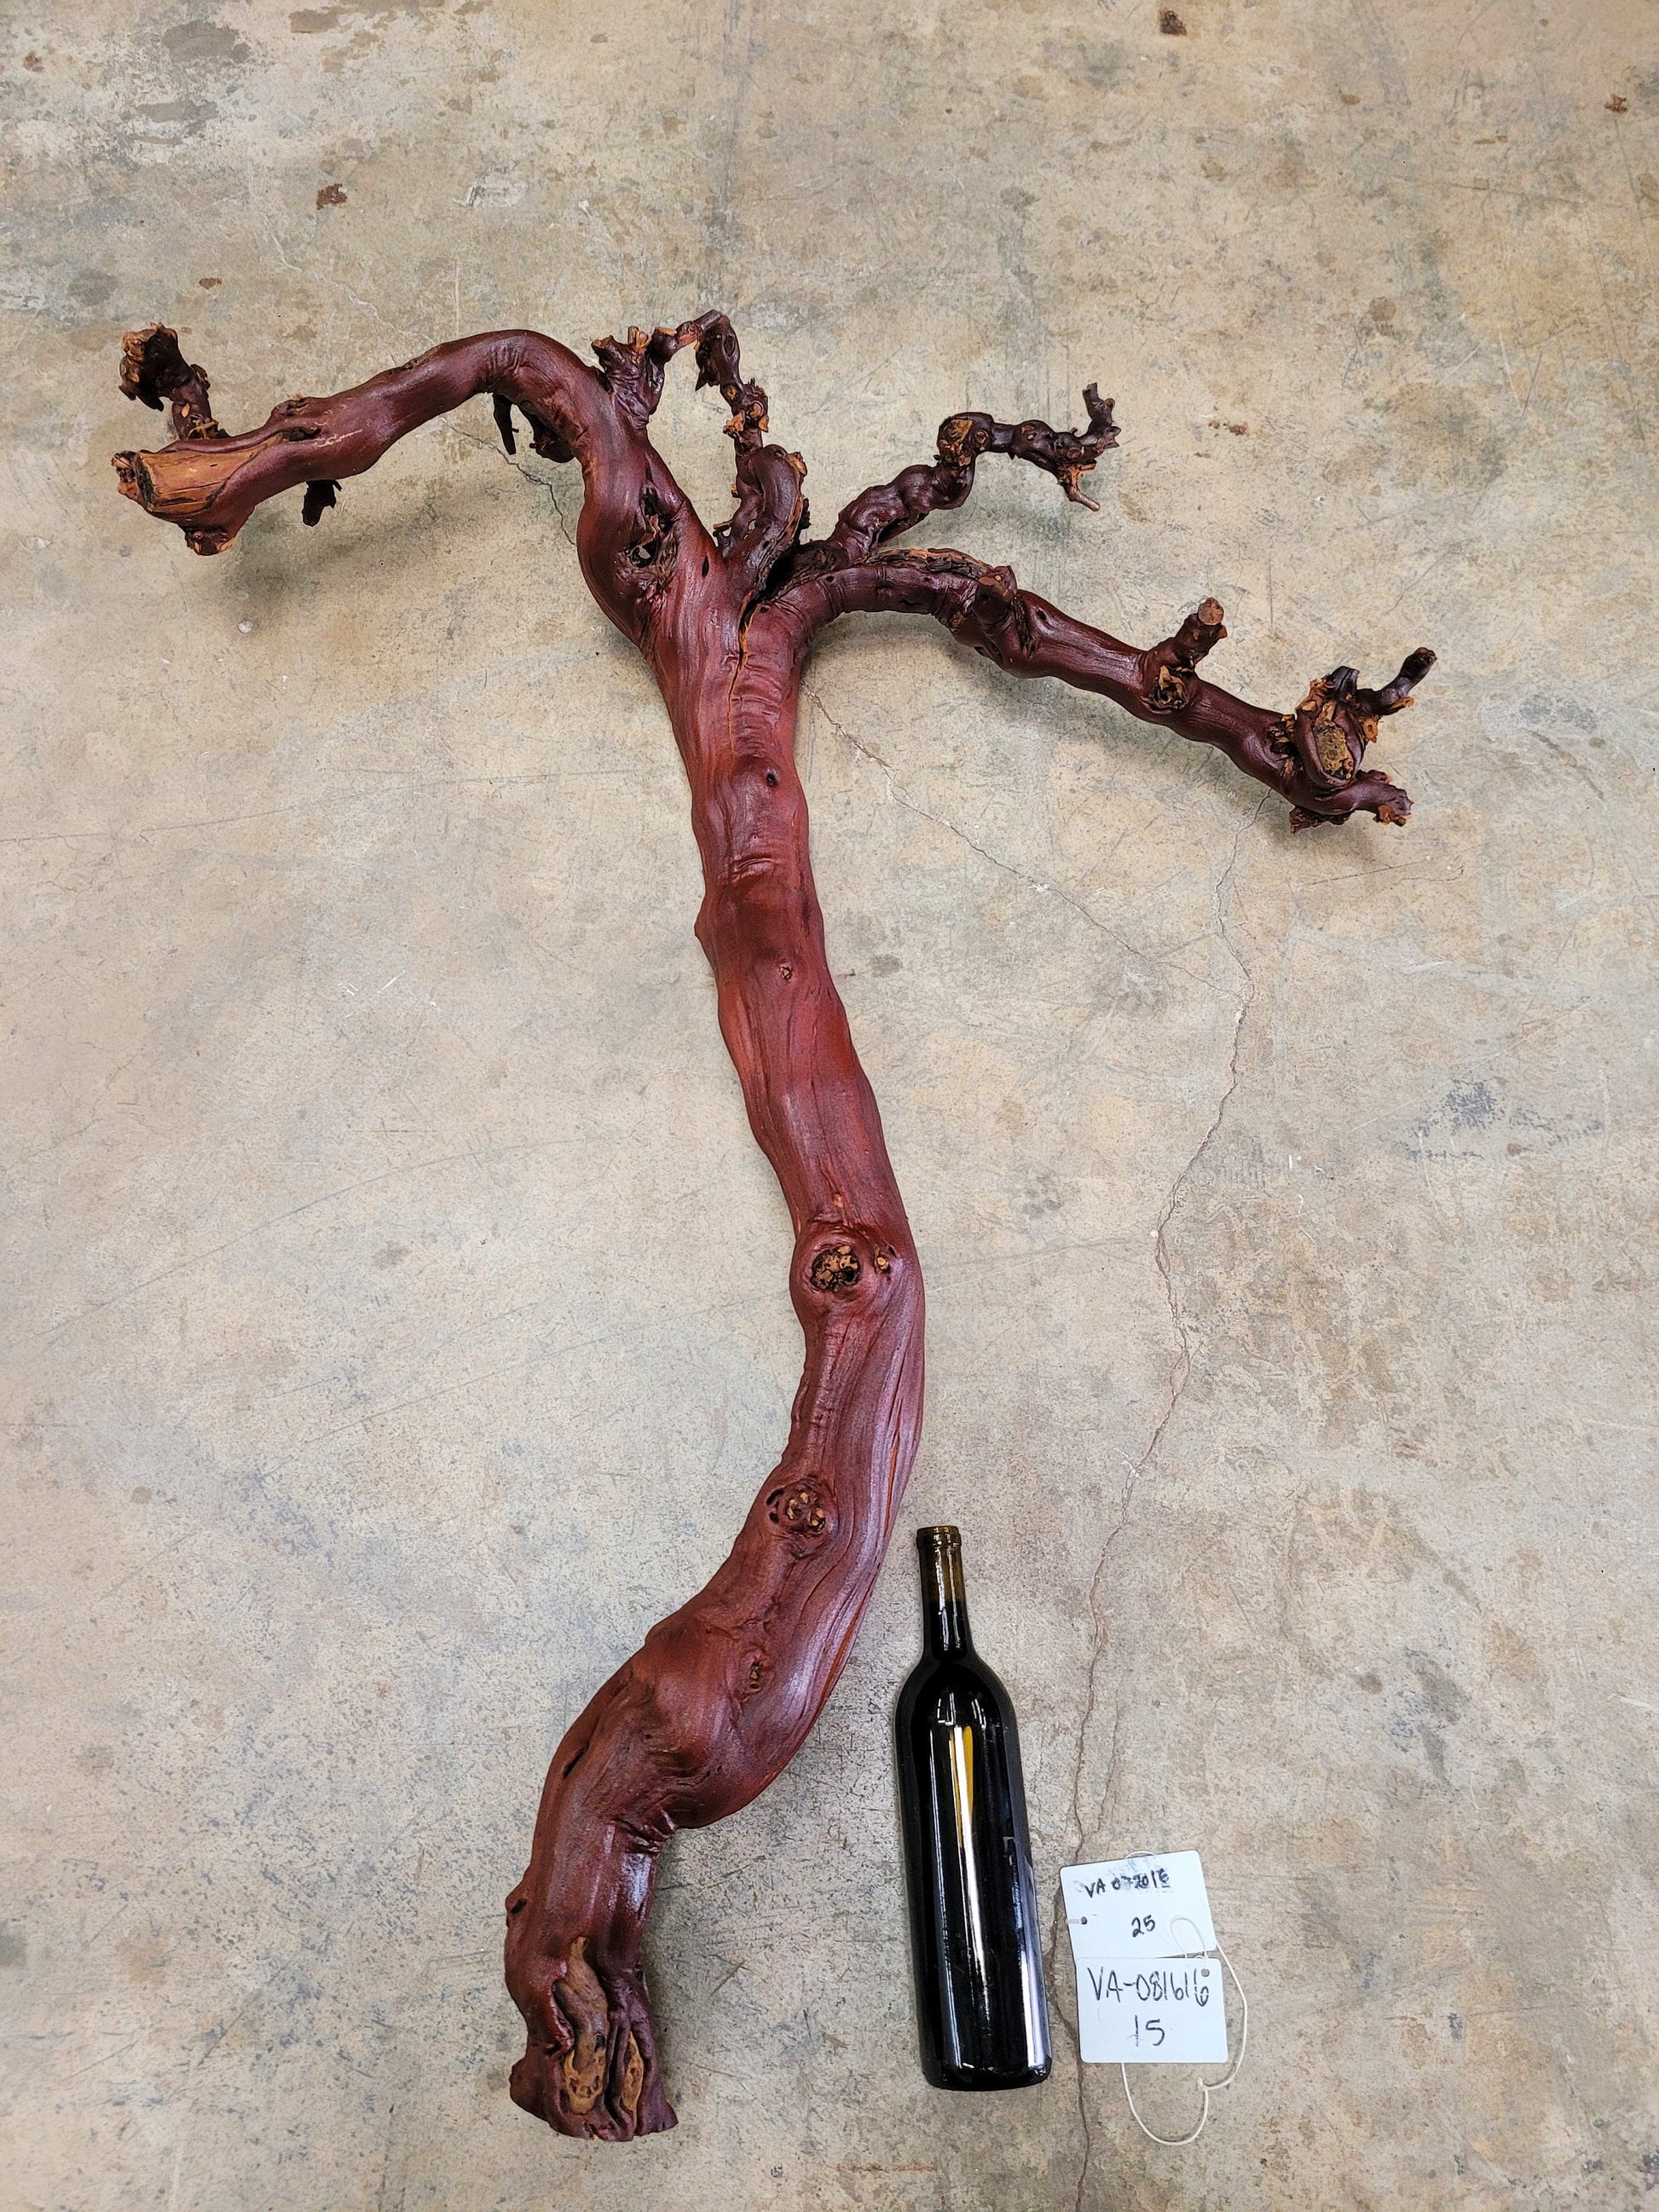 Domaine Carnerous Grape Vine Art From made from retired Napa Pinot Noir grapevine 100% Recycled + Ready to Ship! 081616-15